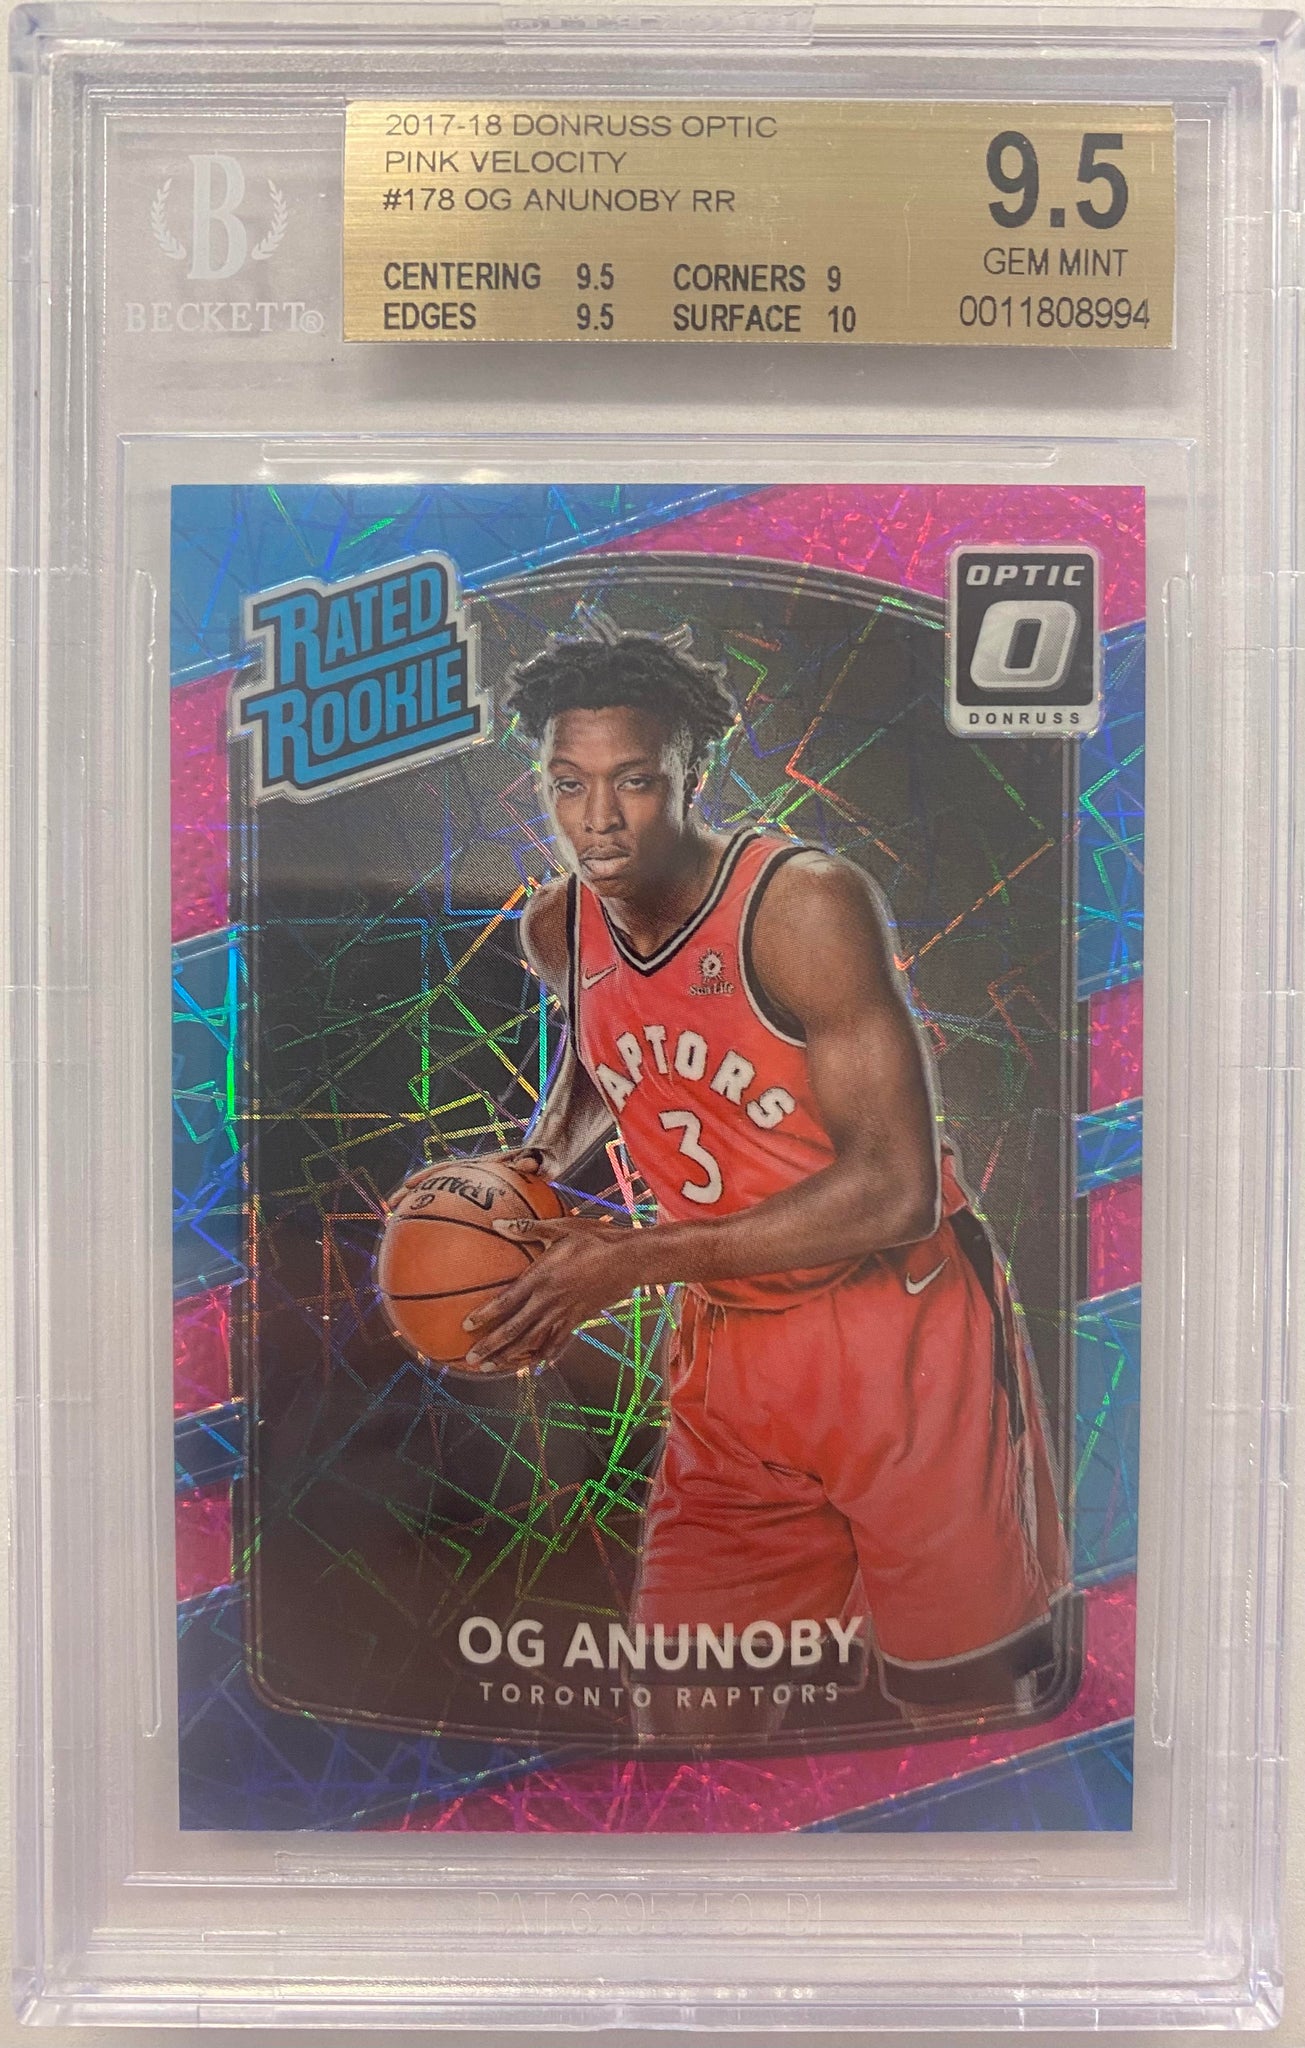 2017-18 Donruss Optic OG Anunoby Rated Rookie Pink Velocity 07/79 #178 BGS GEM MINT 9.5